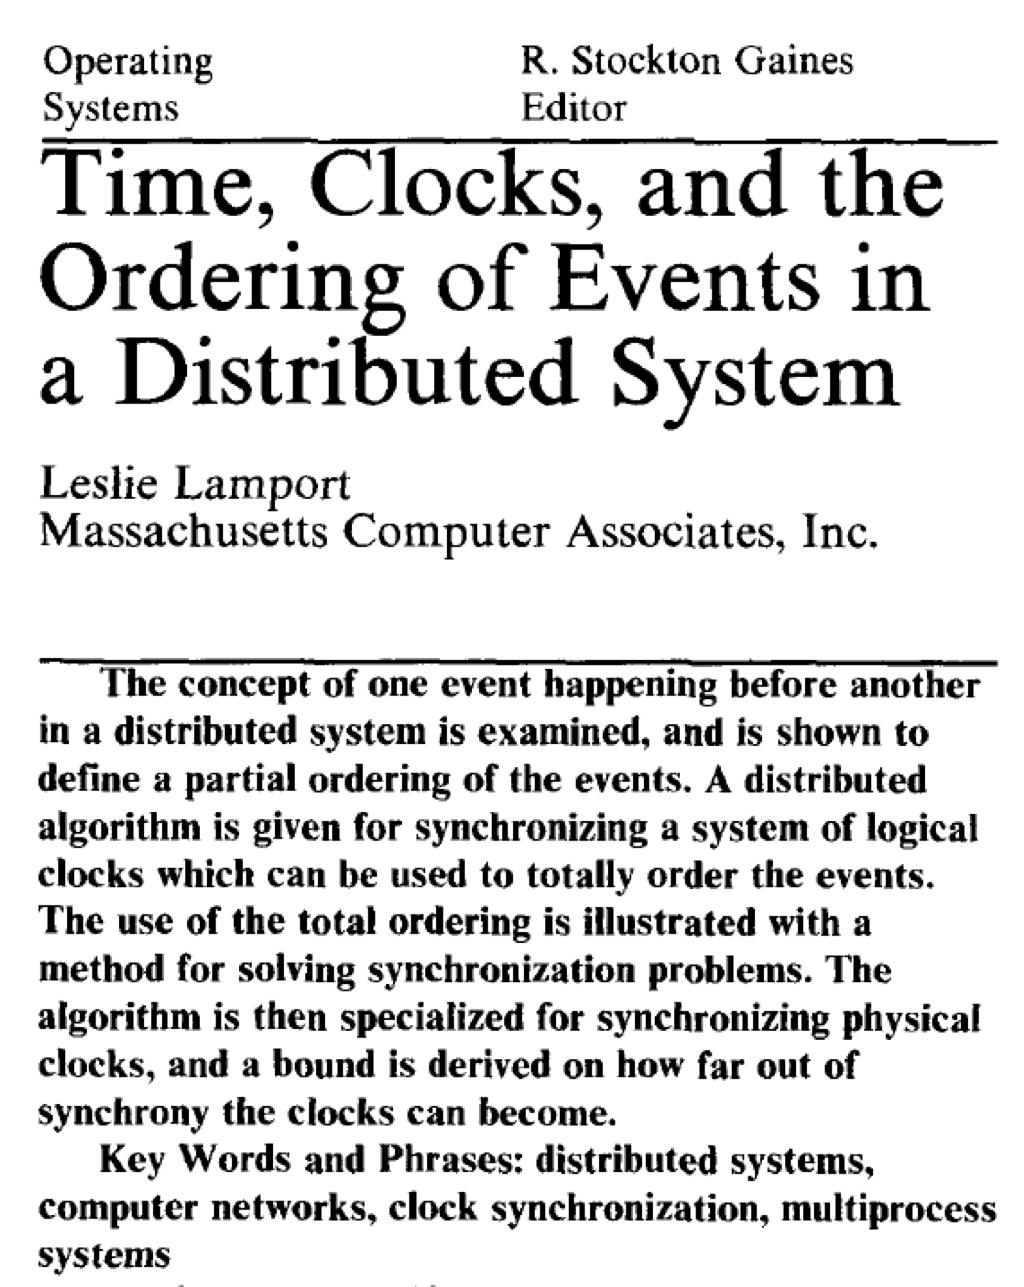 Logical clock Historically introduced by Lamport in 78 was one of the contributions motivating the Turing award easy, pleasant to read, applications described, but a little